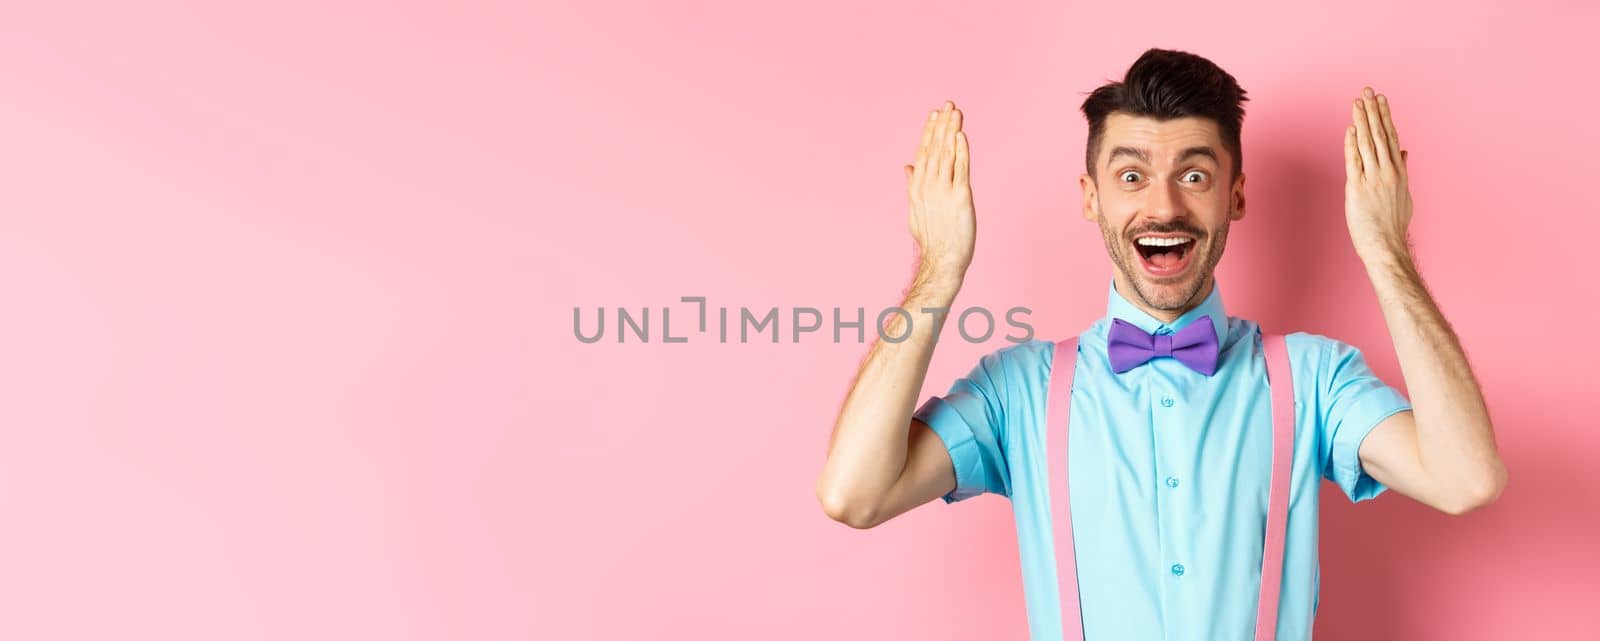 Cheerful young man open eyes for surprise present on holiday celebration, looking amazed at gift, standing on pink background.